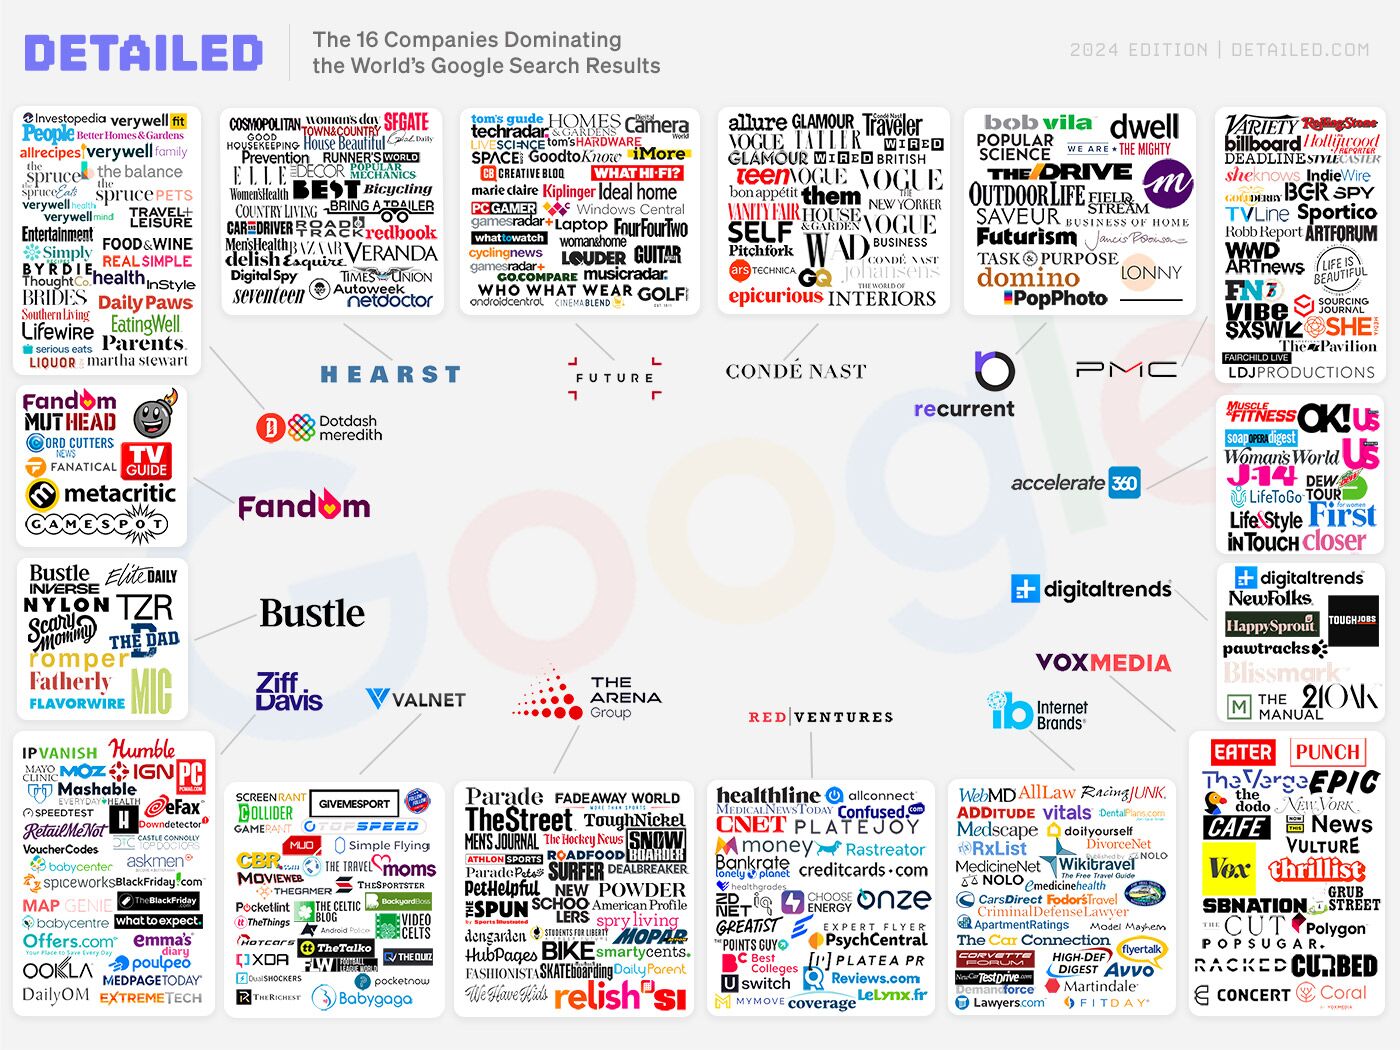 The 16 companies getting 3.5 billion monthly clicks from Google across 588 brands